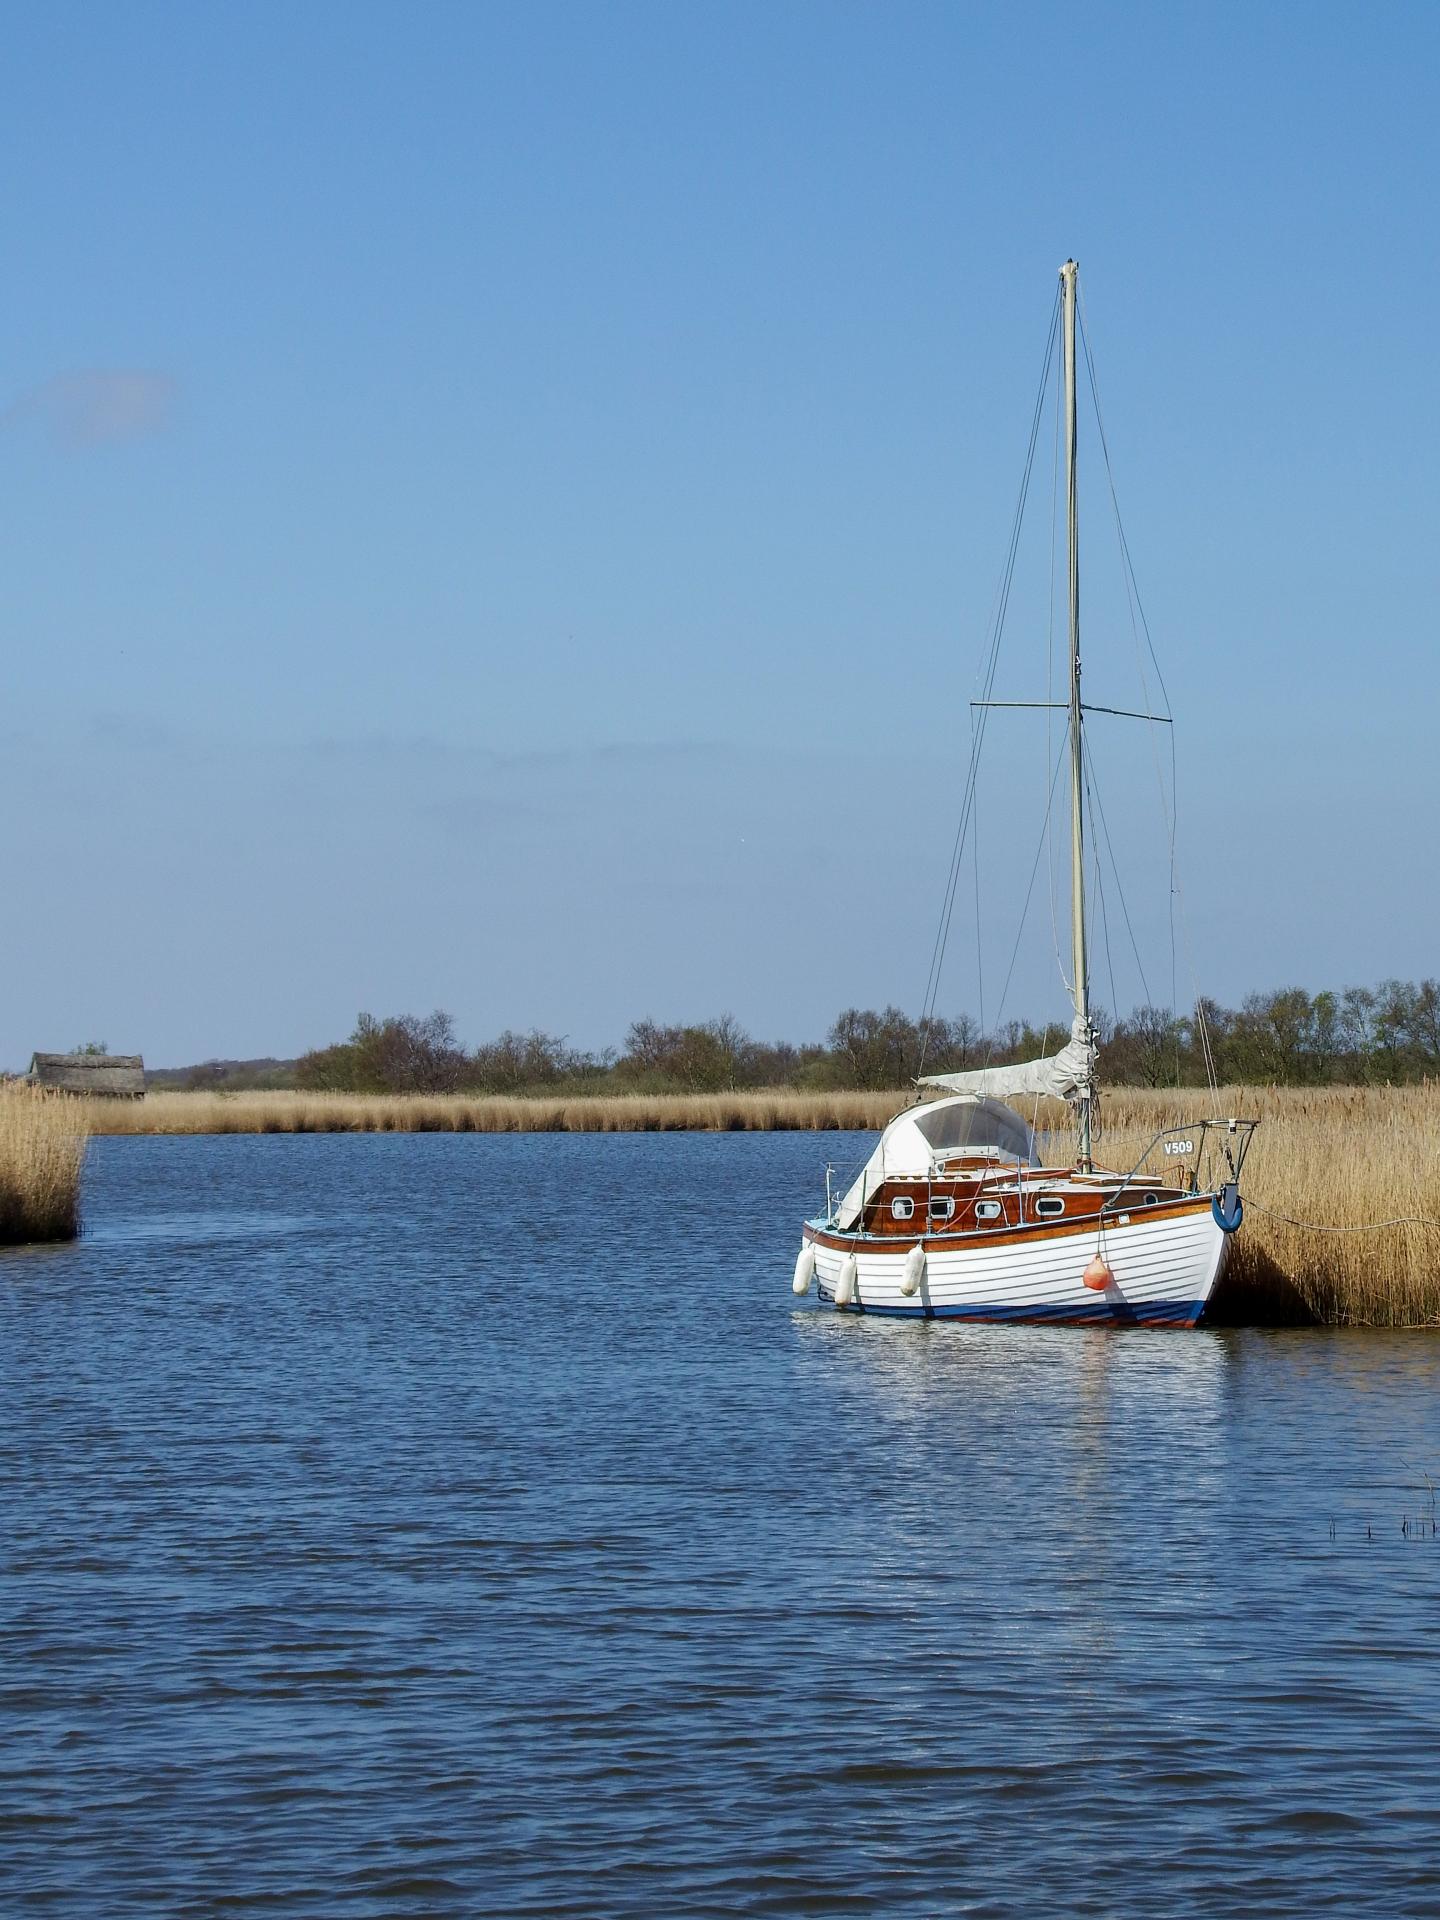 Benefits of Research -- Broads National Park, United Kingdom